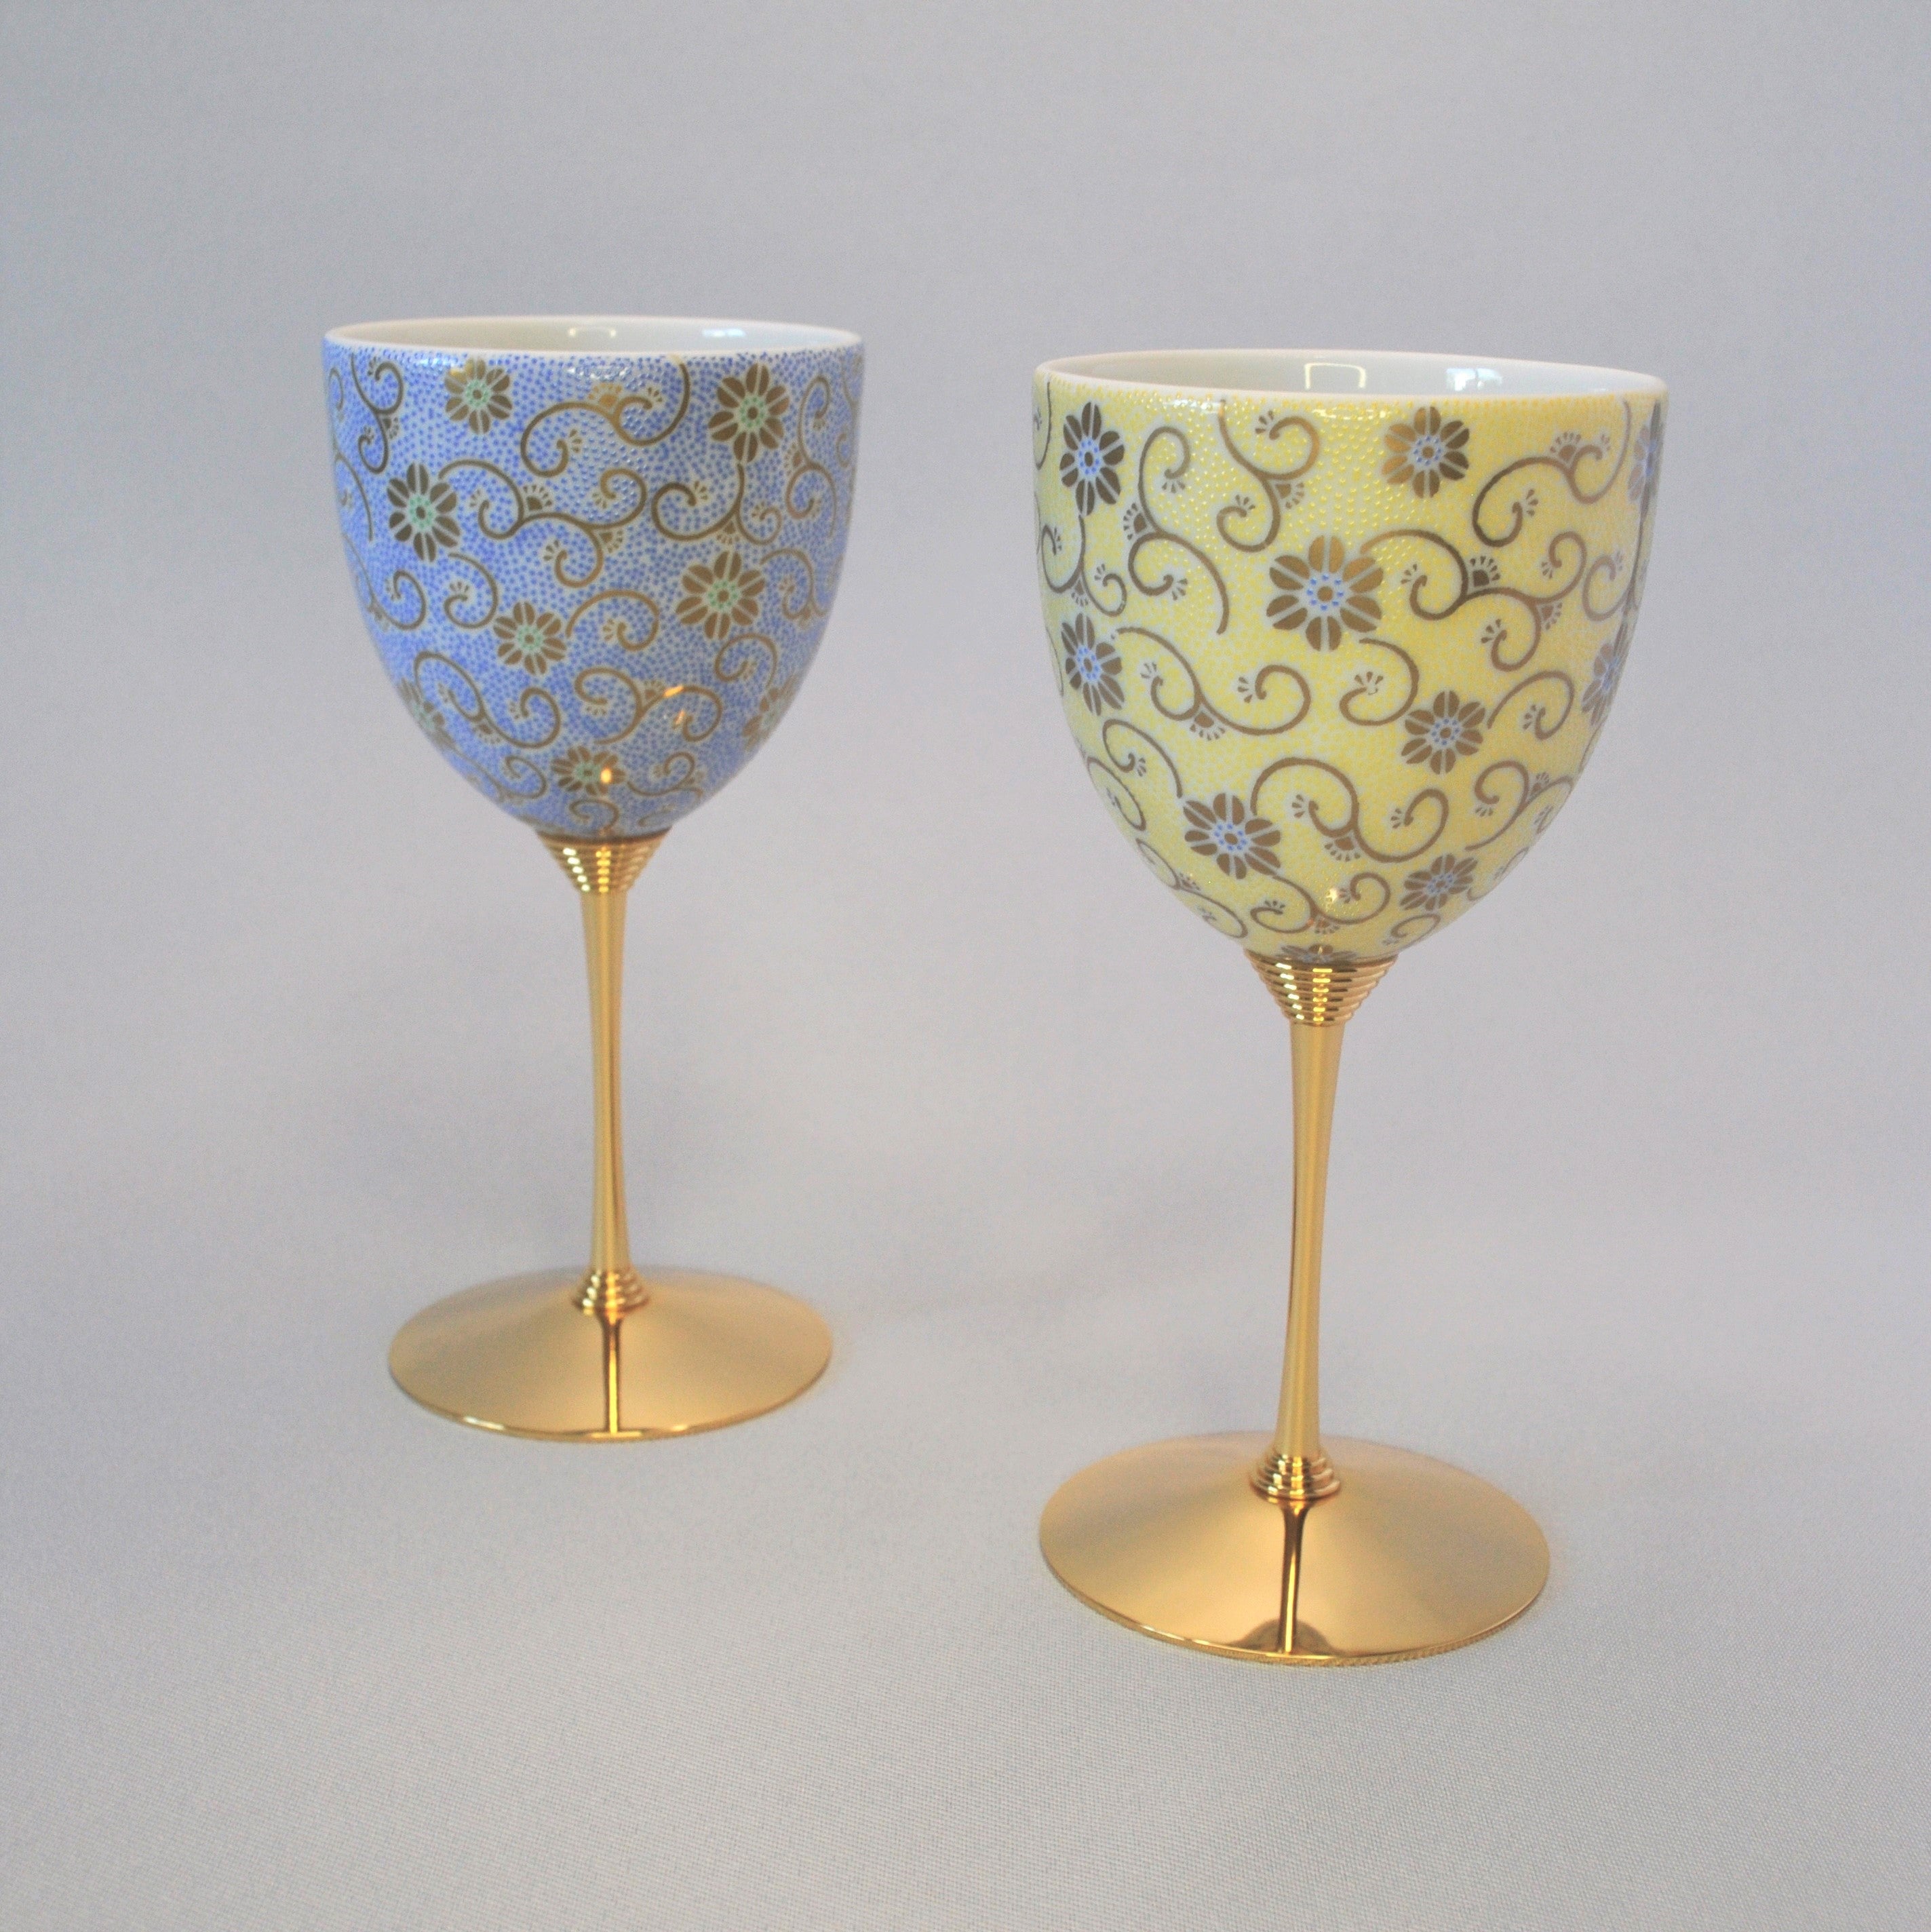 Pair of Wine Goblets (Color Foliage Scroll)